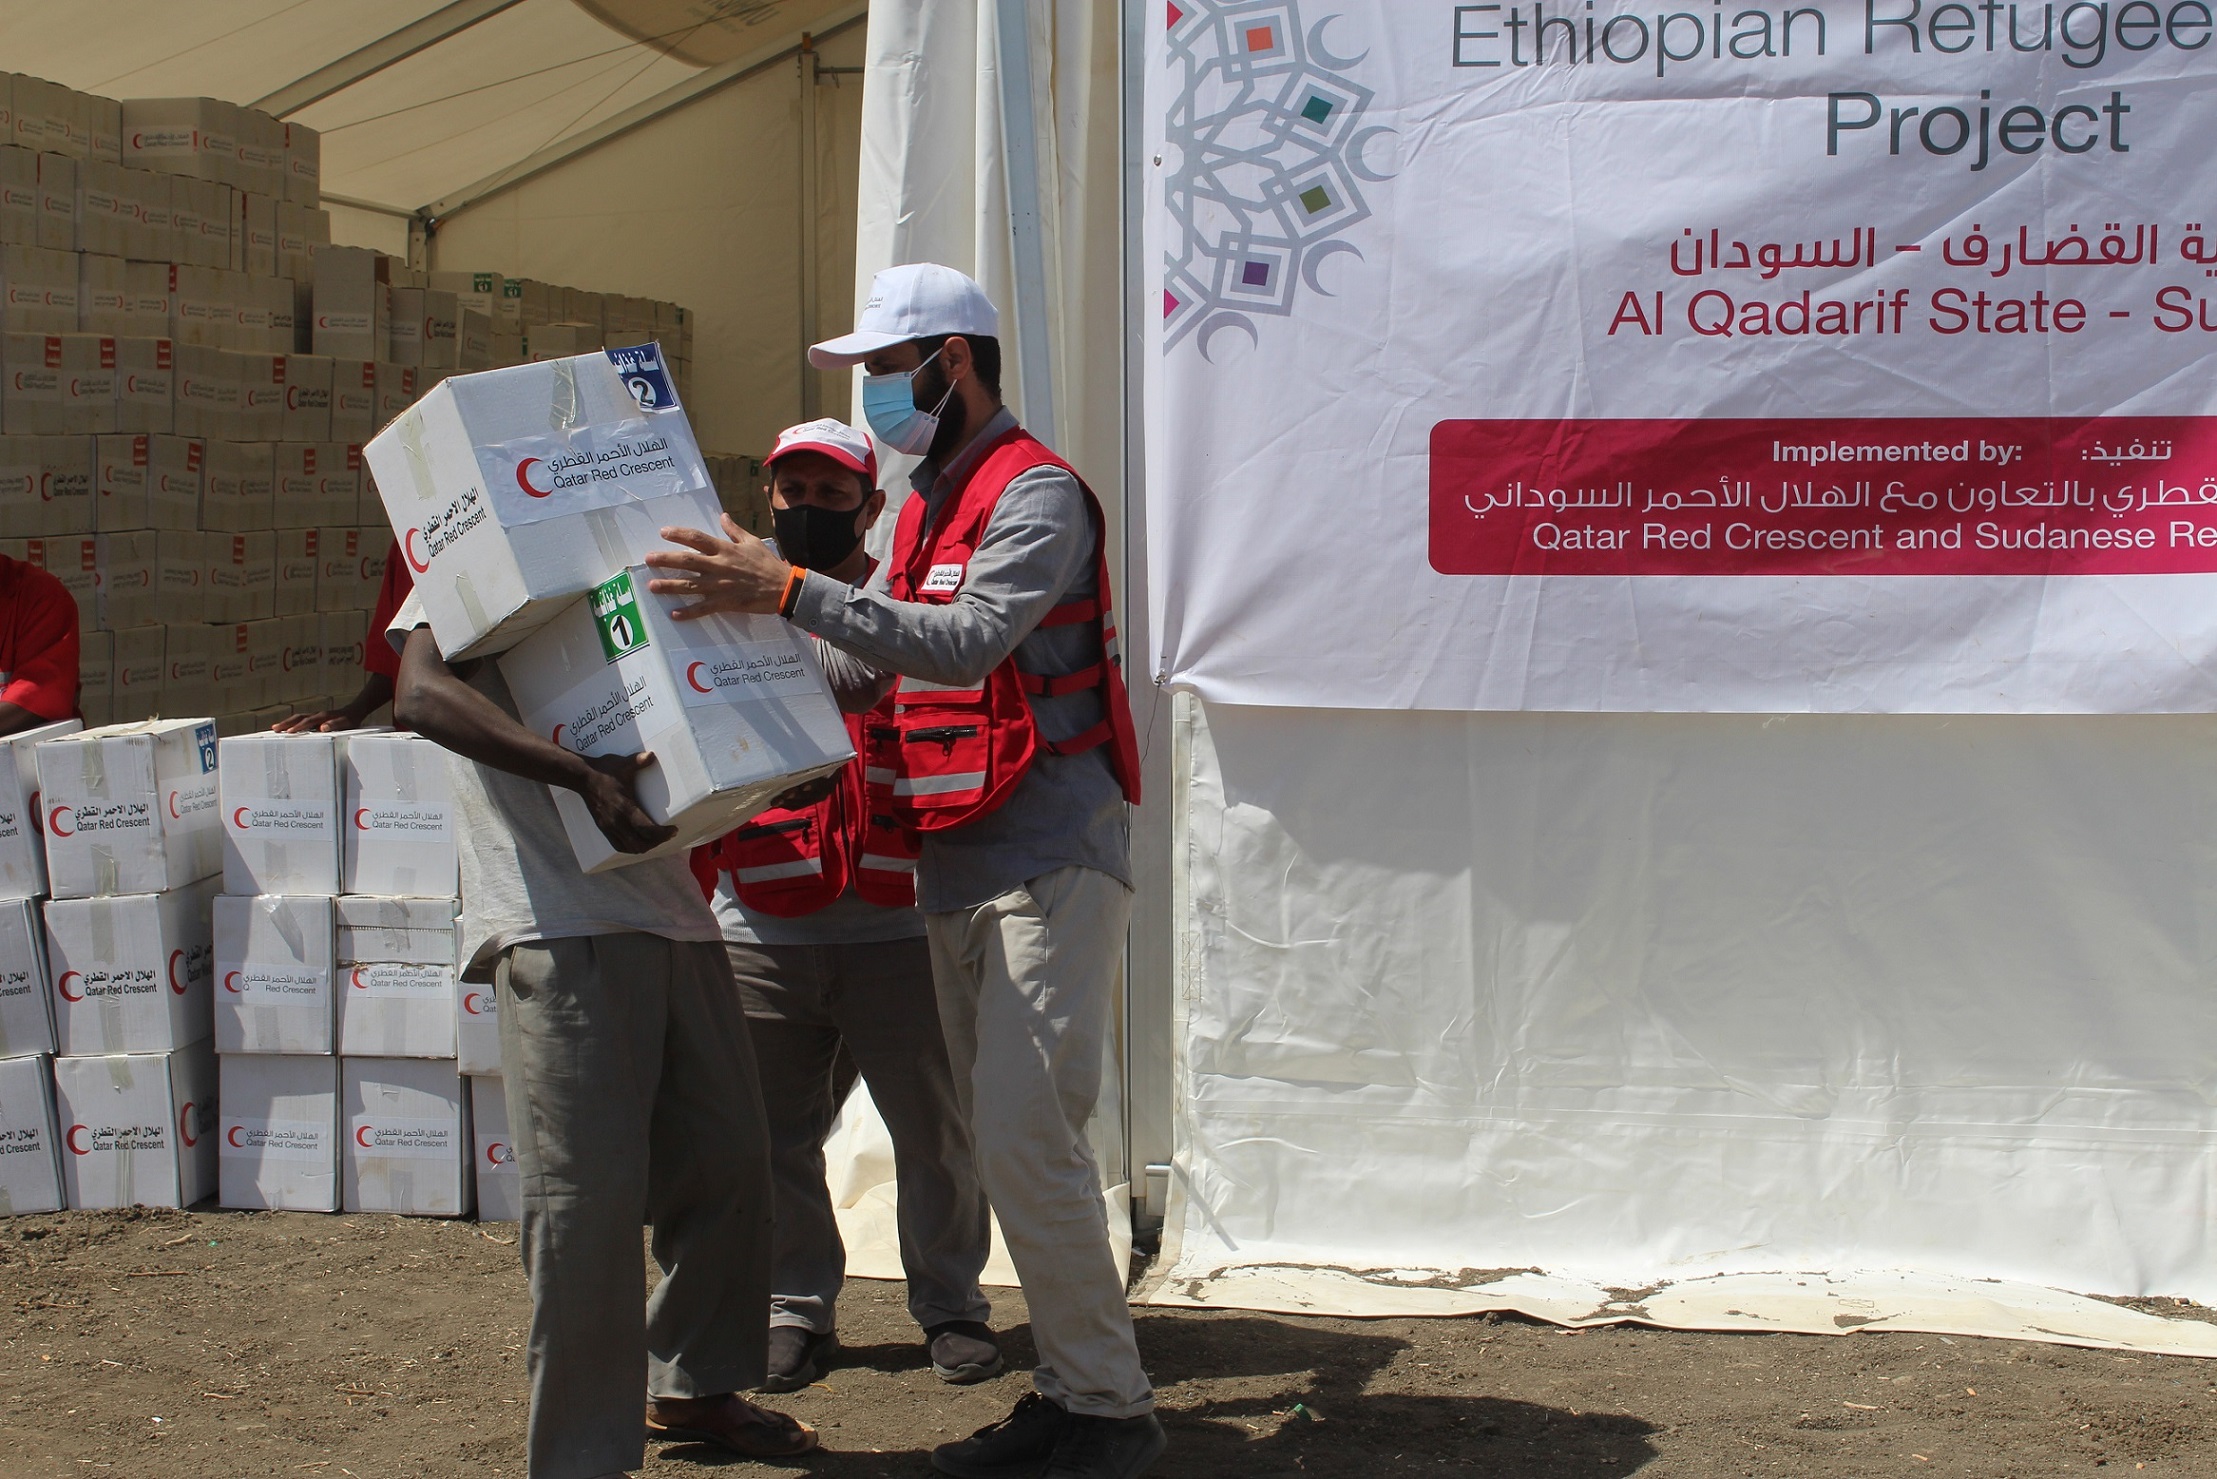 Phase 1 of Ethiopian Refugee Relief Project in Sudan Completed